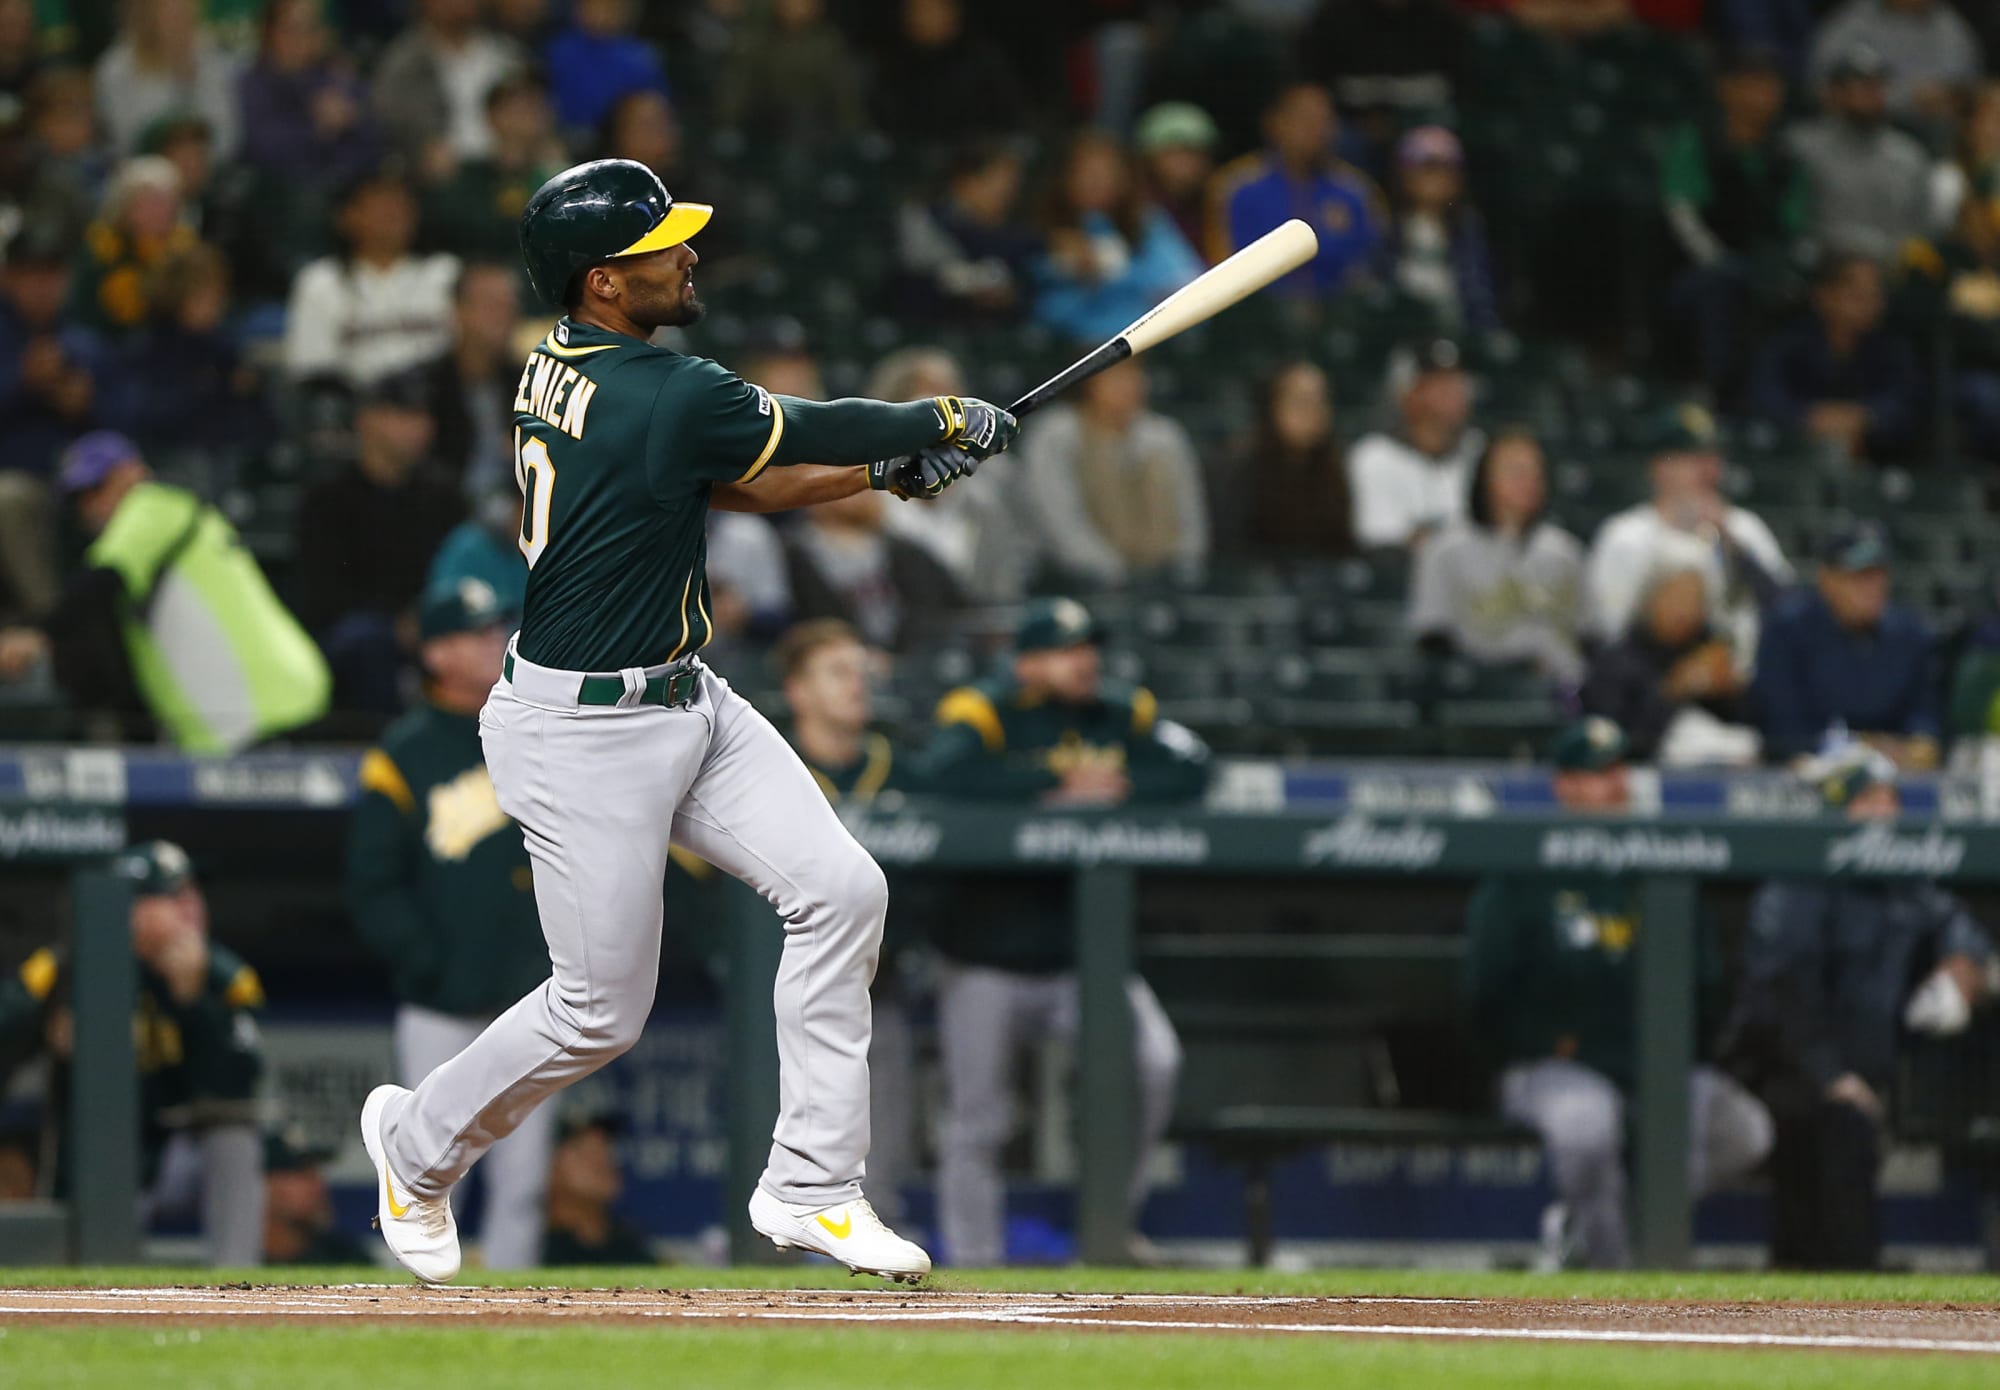 How the A's can save face: Trade for Marcus Semien